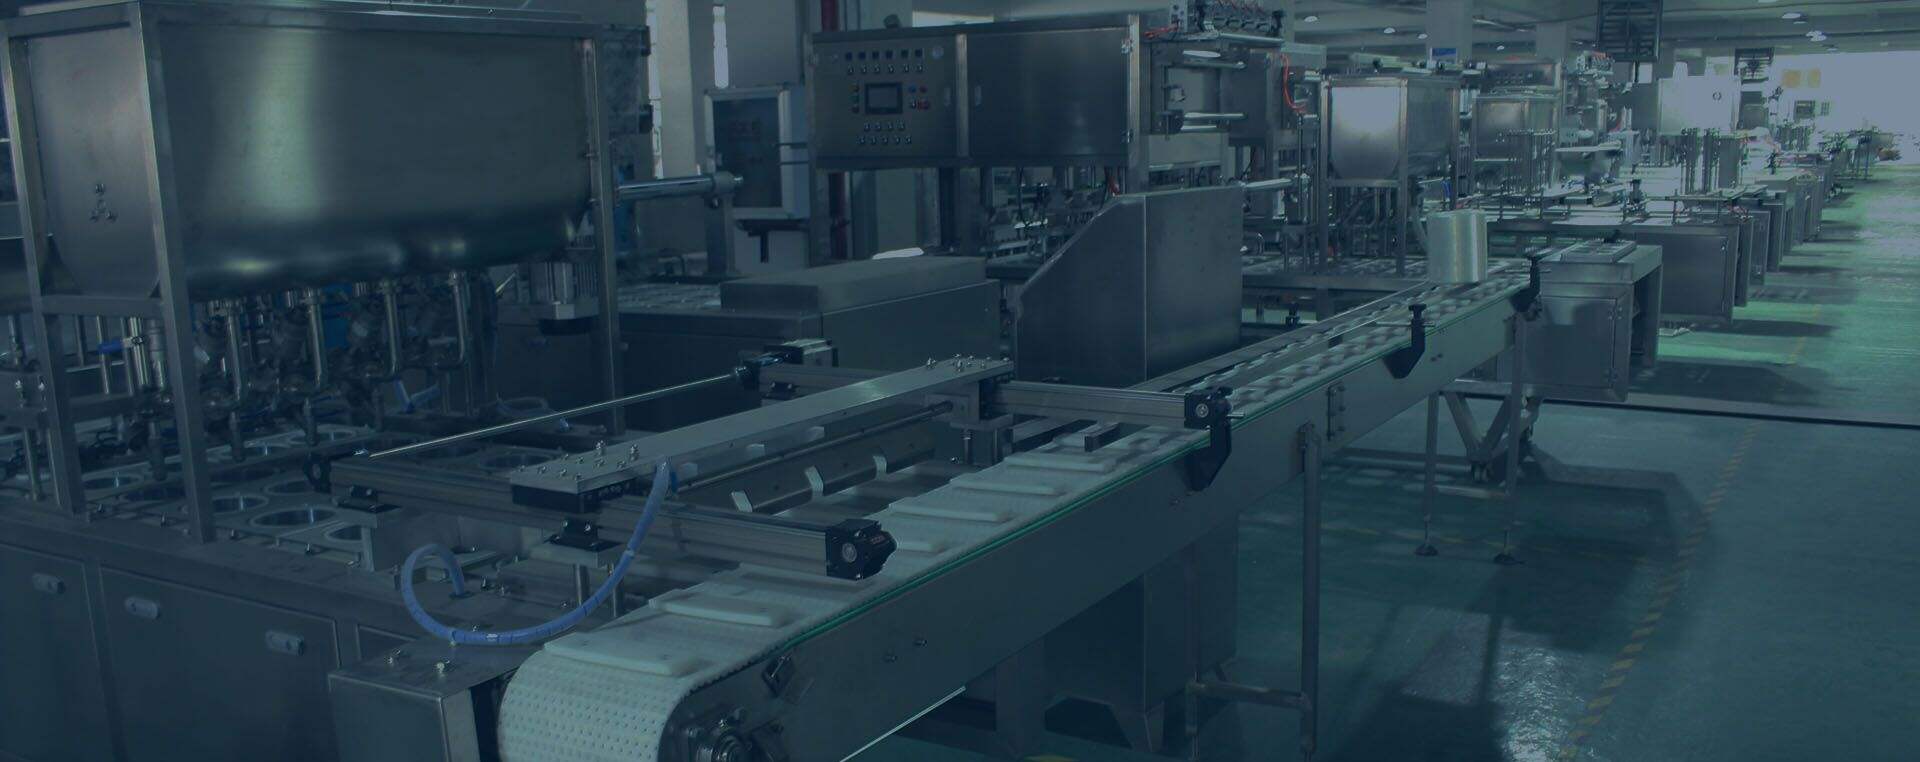 Fully Automatic Multi-Function <br>Filling And Sealing Machine